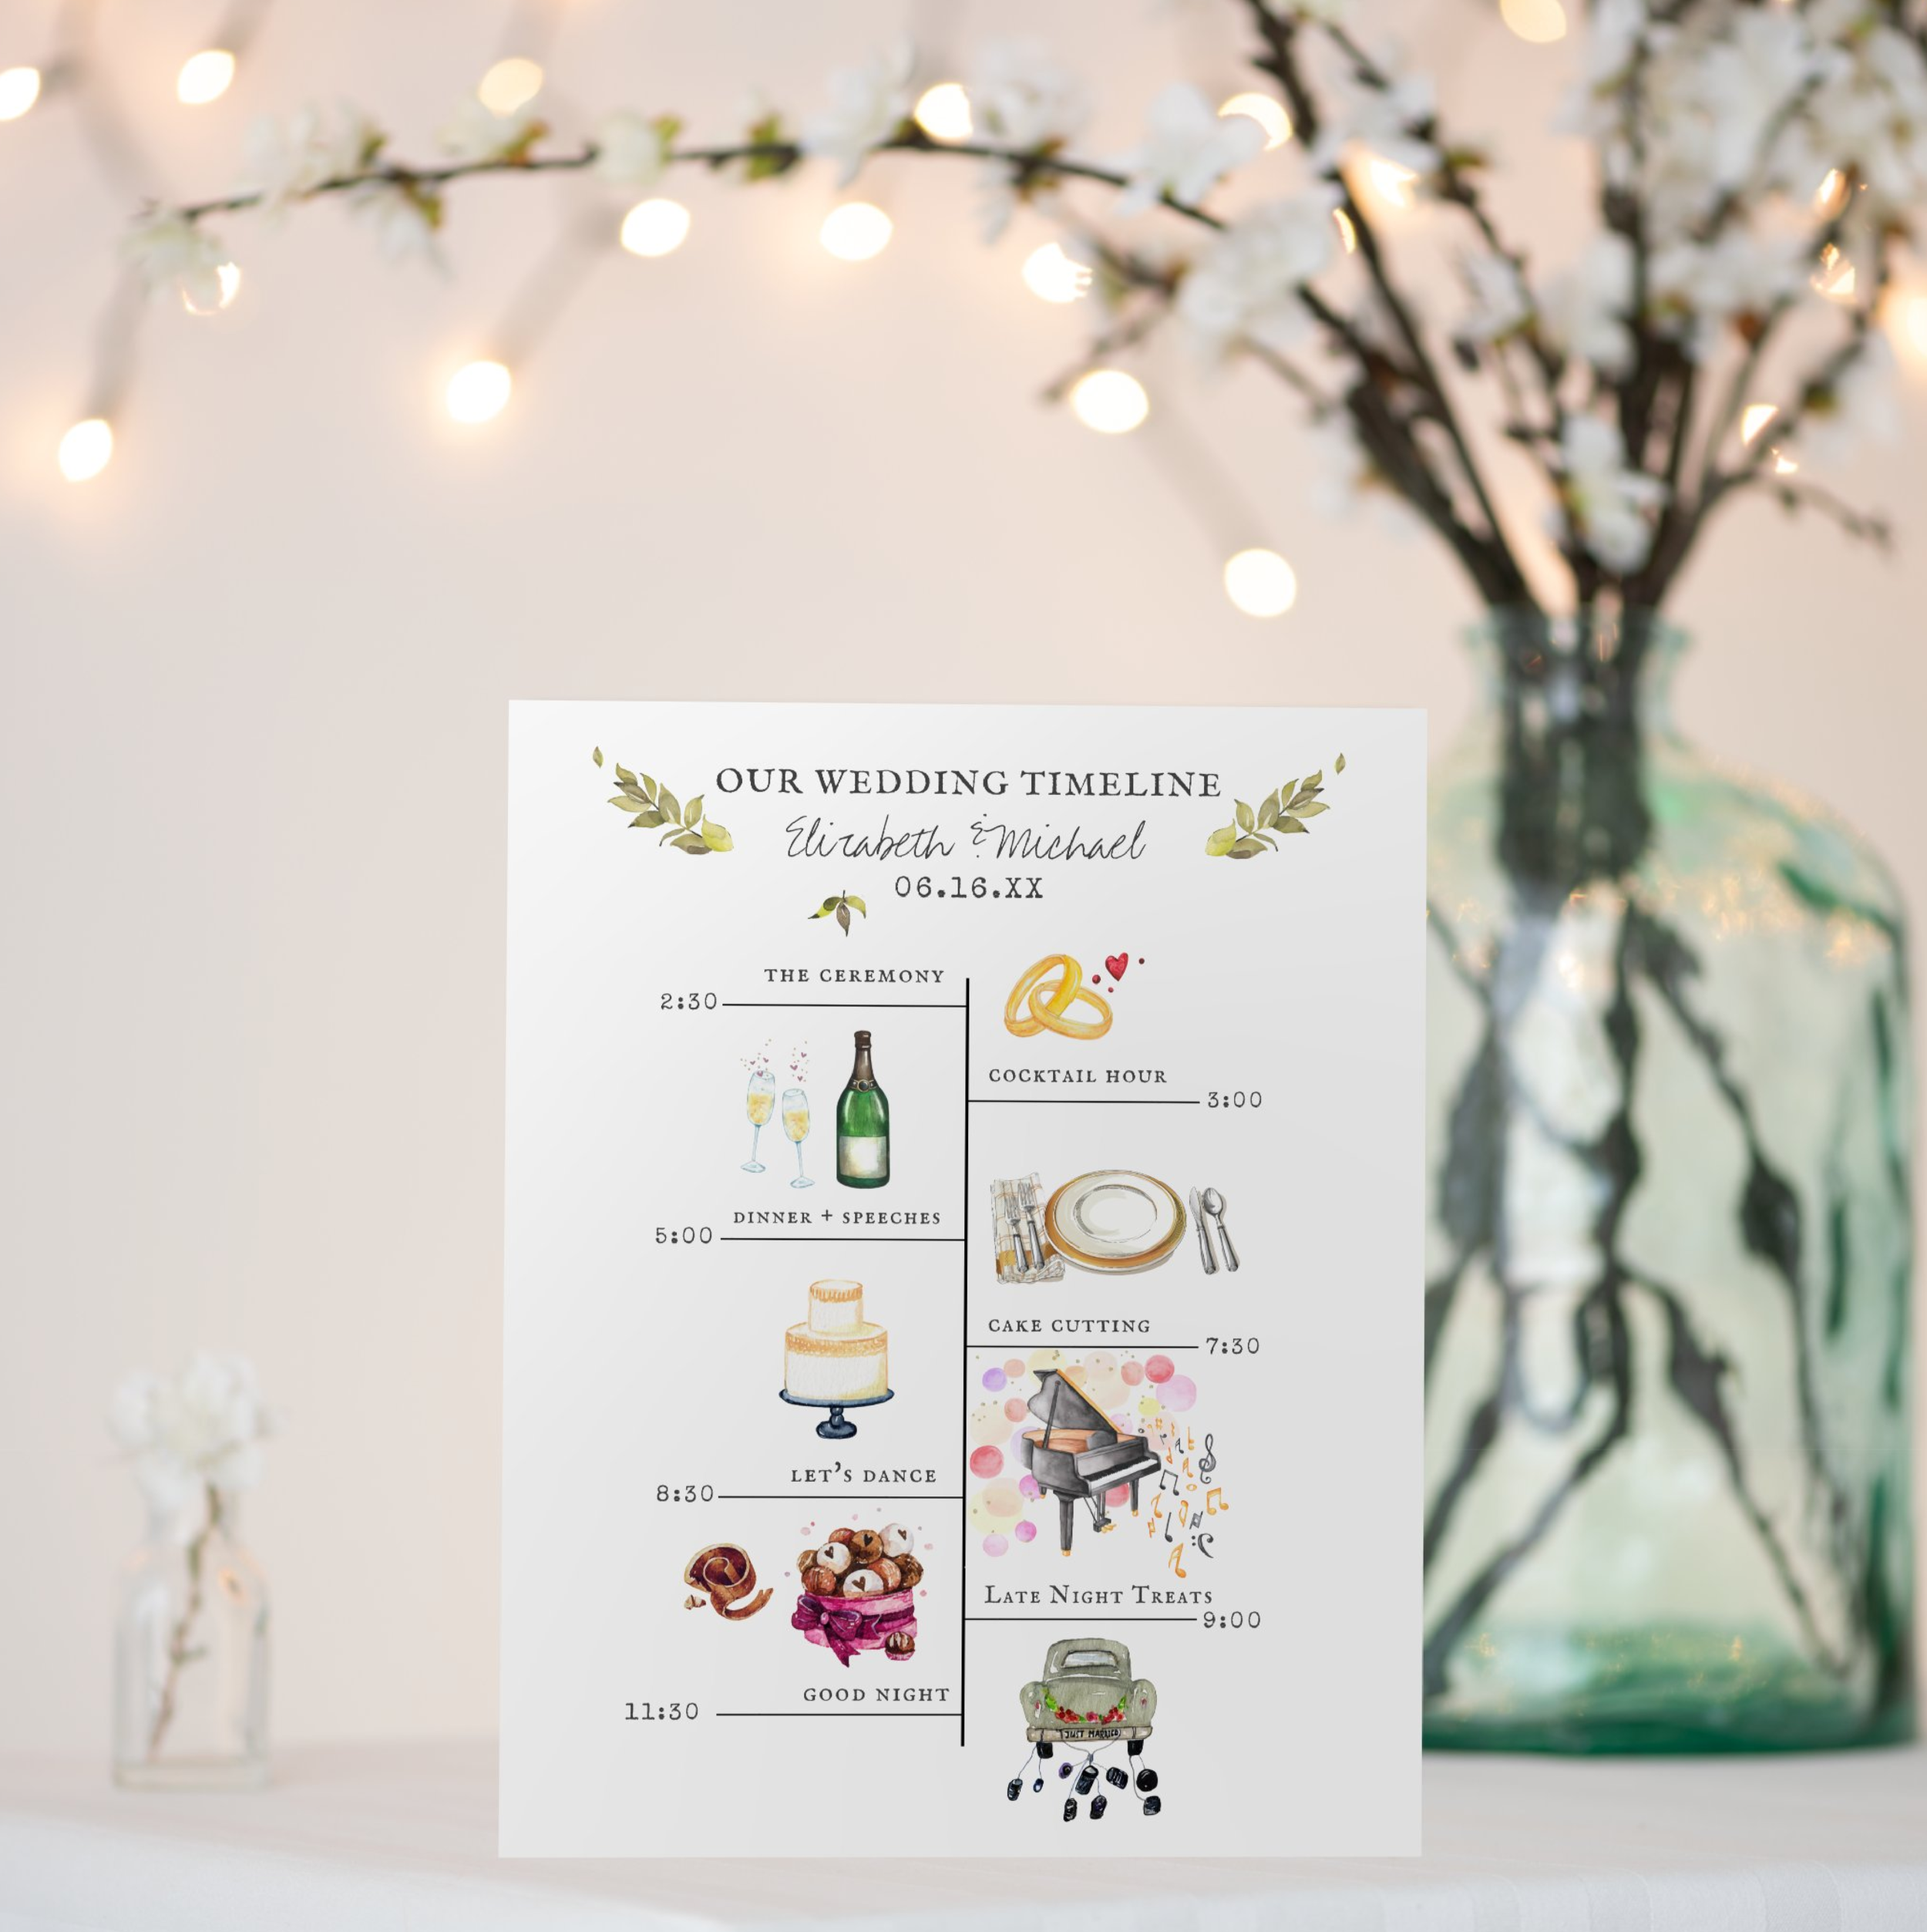 wedding_itinerary_schedule_welcome_sign-rea9446cb5cd74bc983b38a68752988aa_uqgp6_1024.png